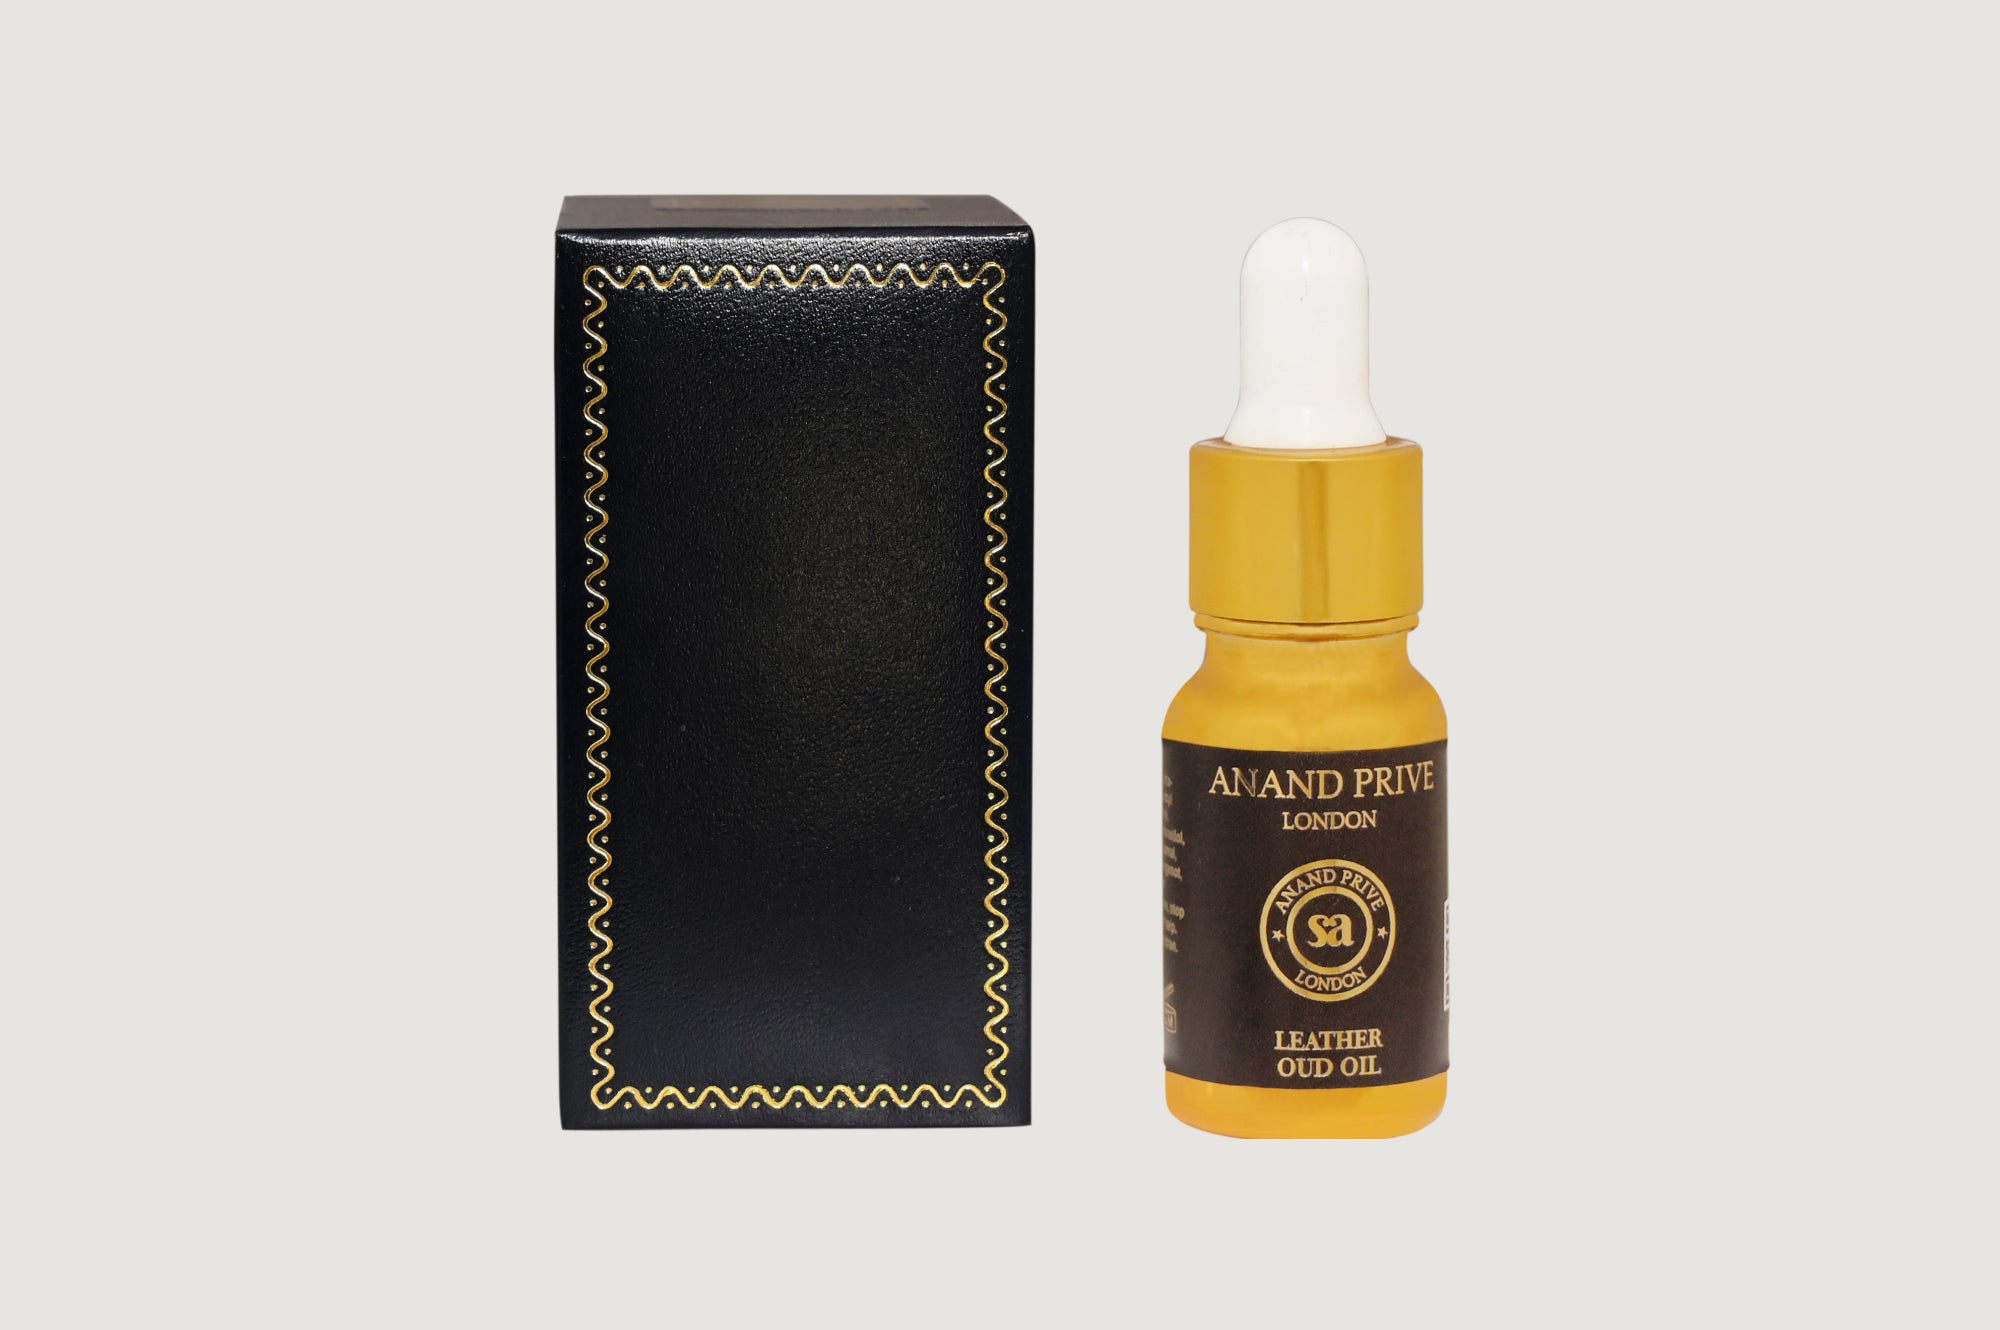 Leather OUD Oil